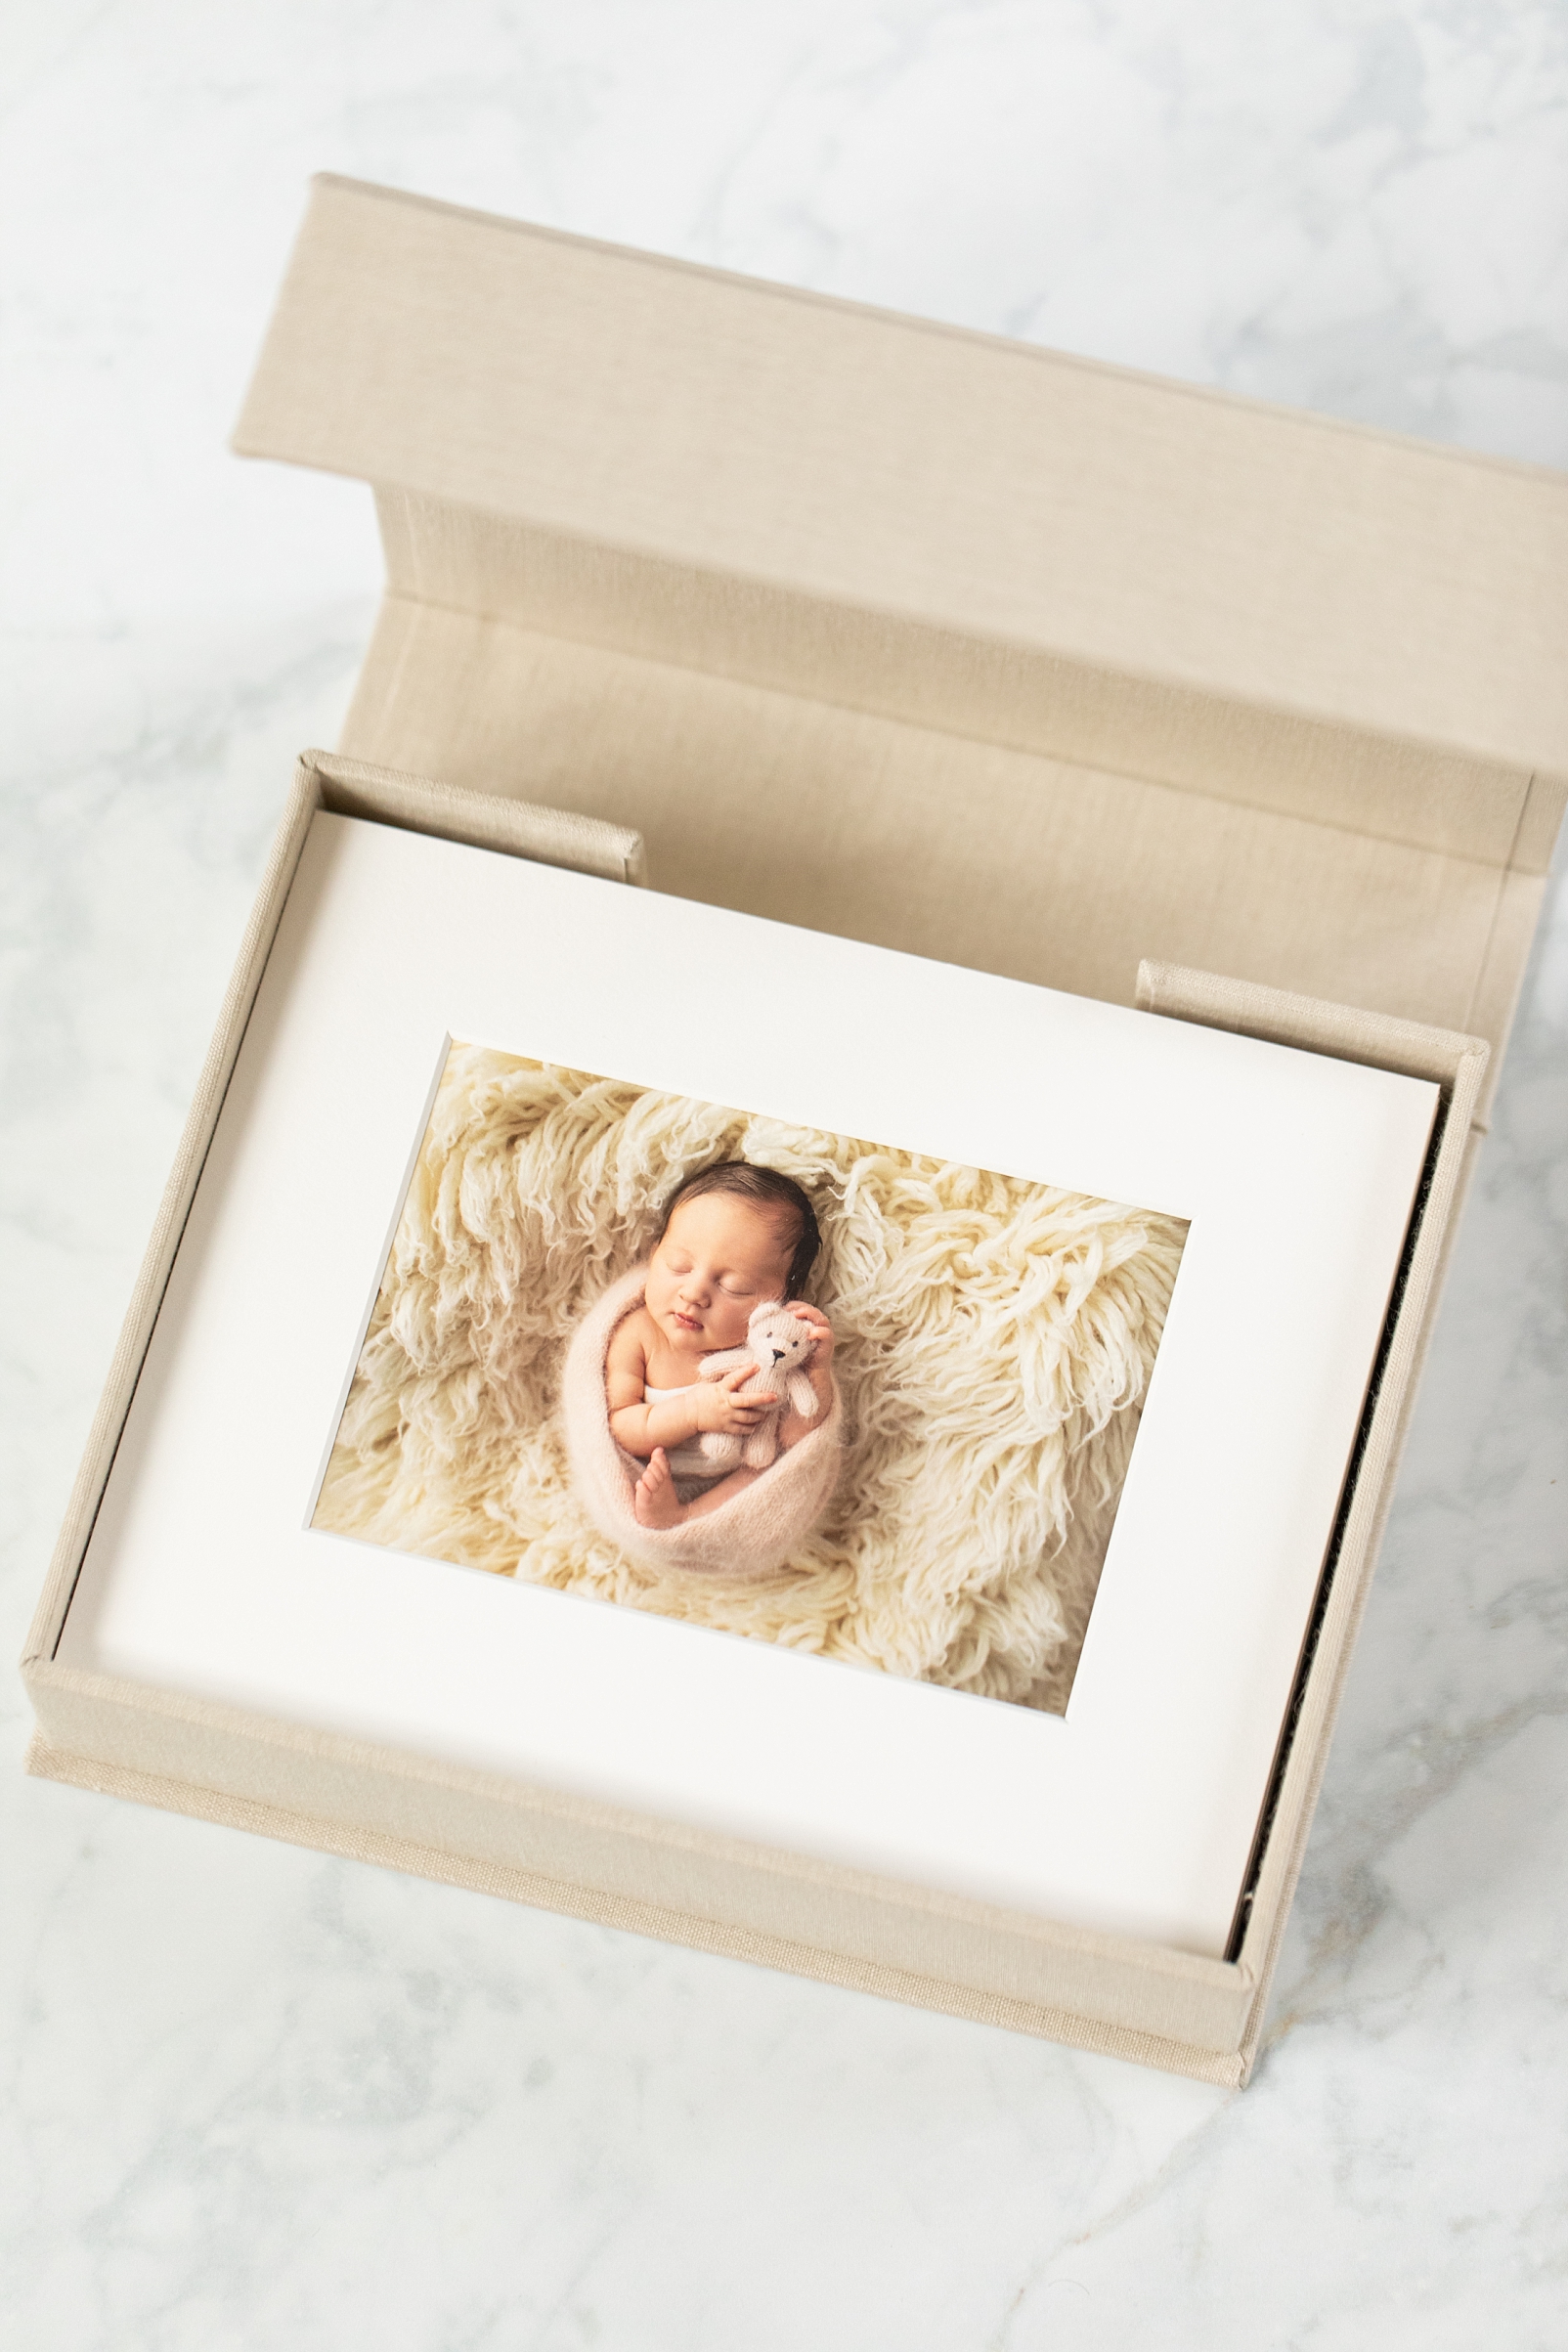 Matted print box with linen cover and magnetic closure with a matted print